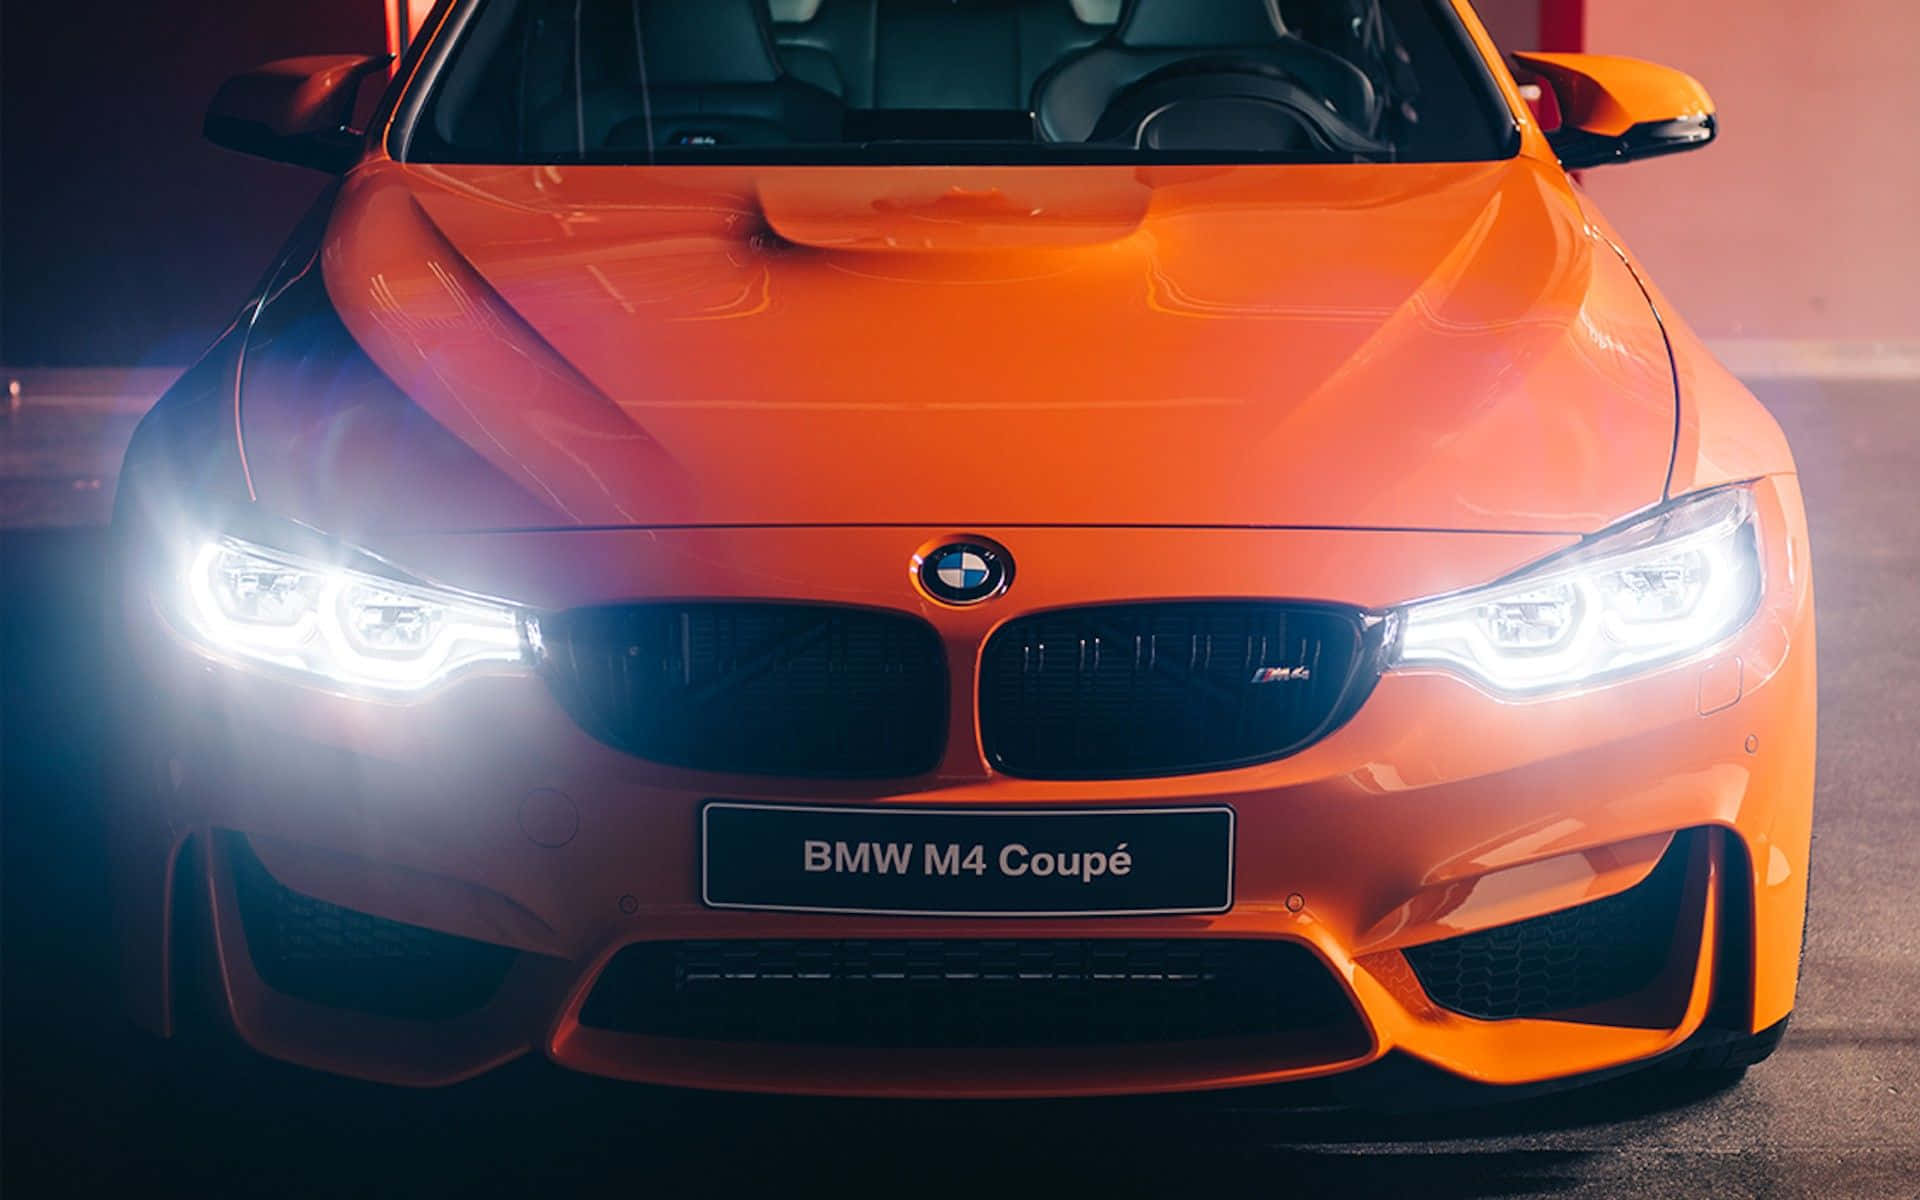 Cool BMW M4 Coupe Wallpaper